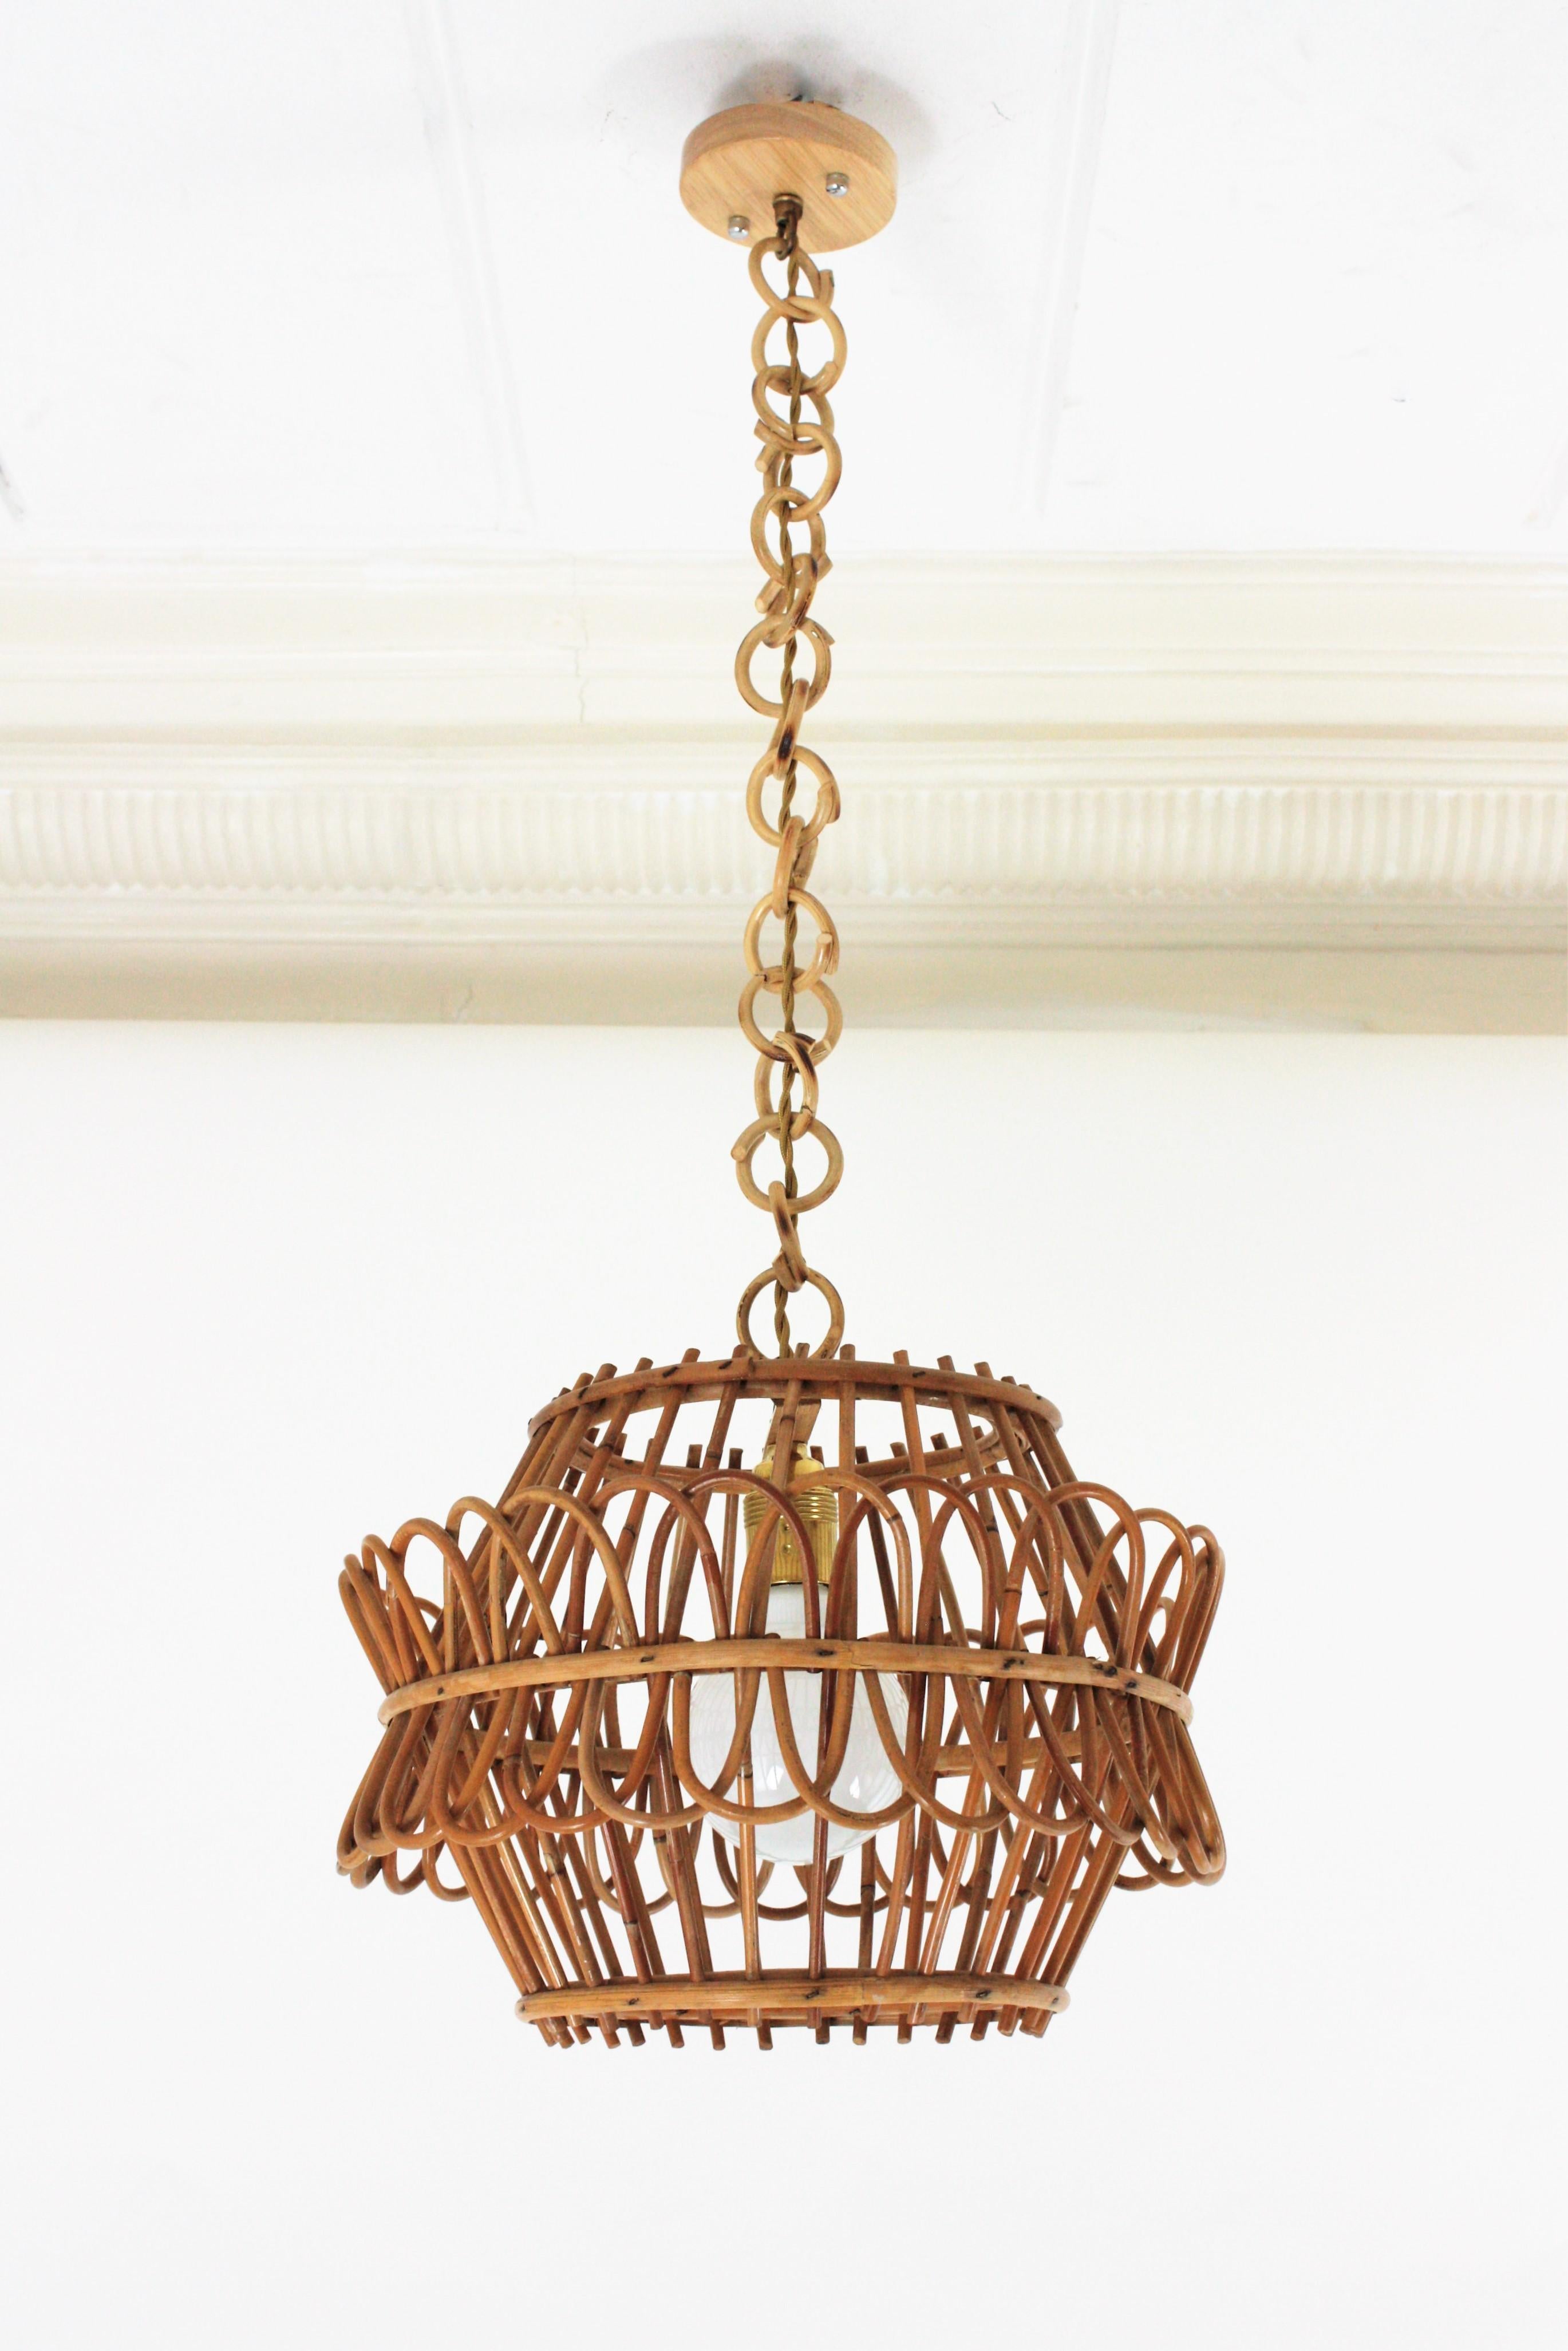 Mid-Century Modern French Pendant Light or Lantern in Rattan, 1950s For Sale